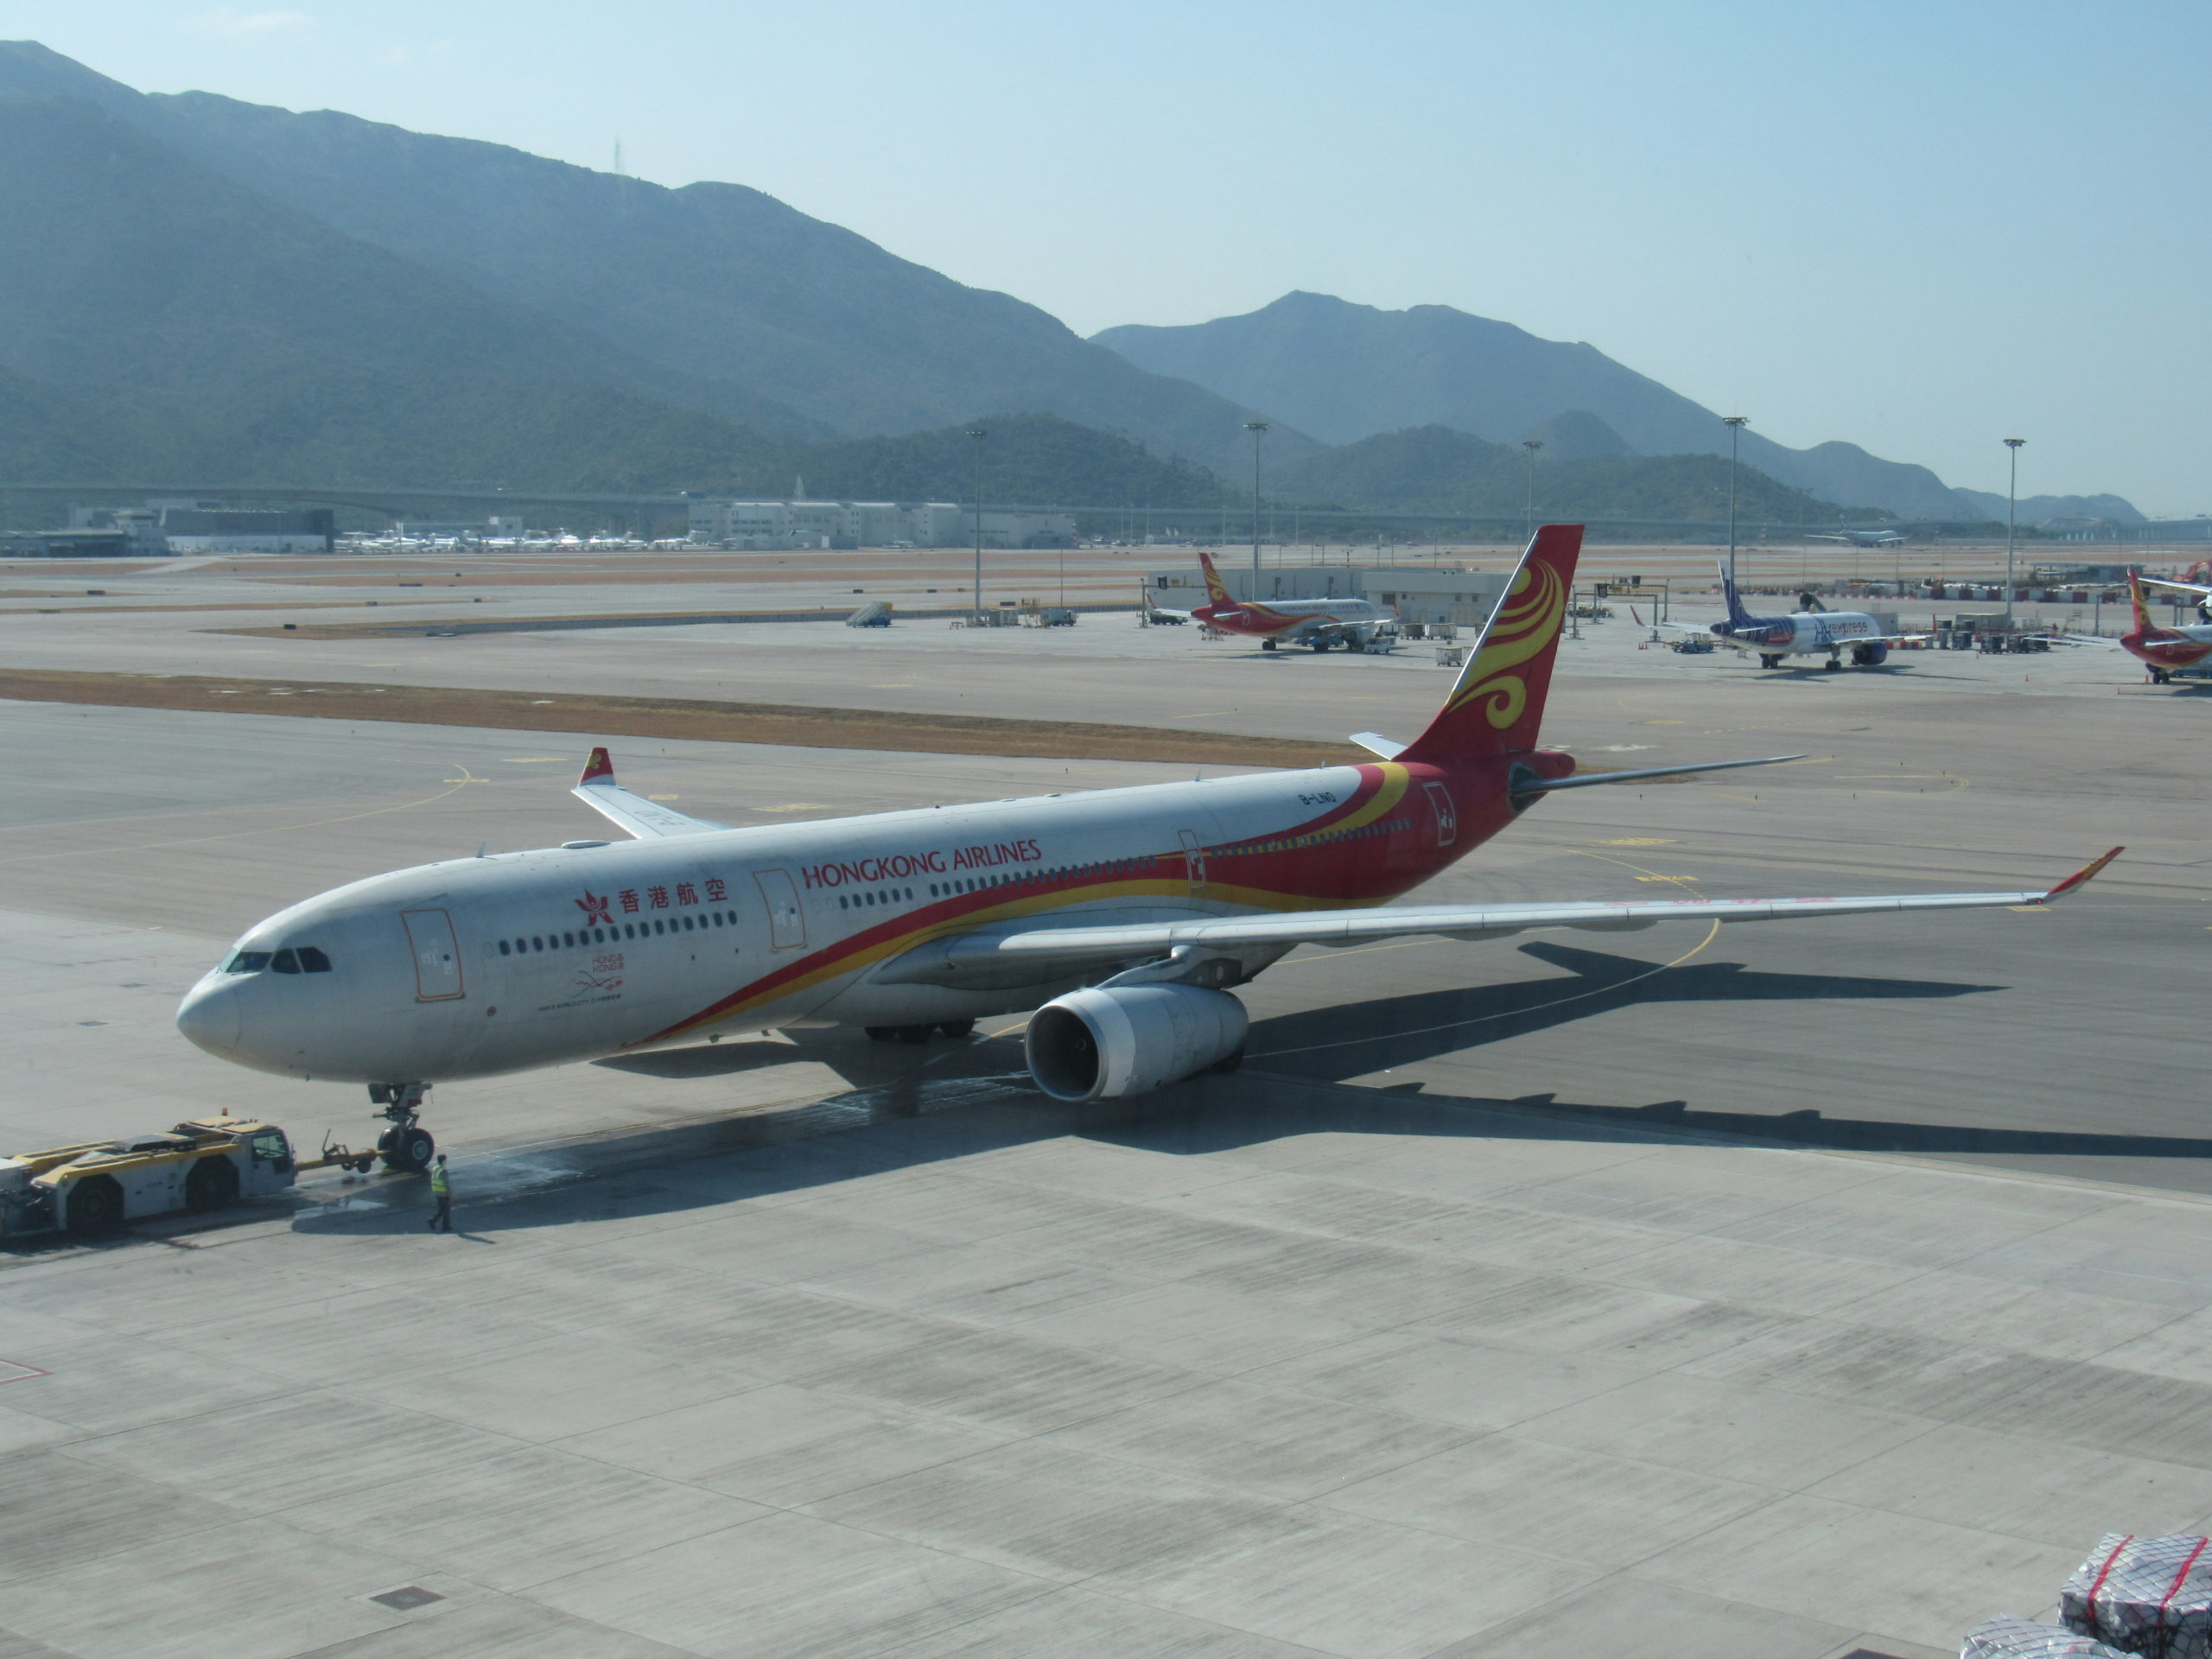 Hong Kong Airlines is a HNA subsidiary